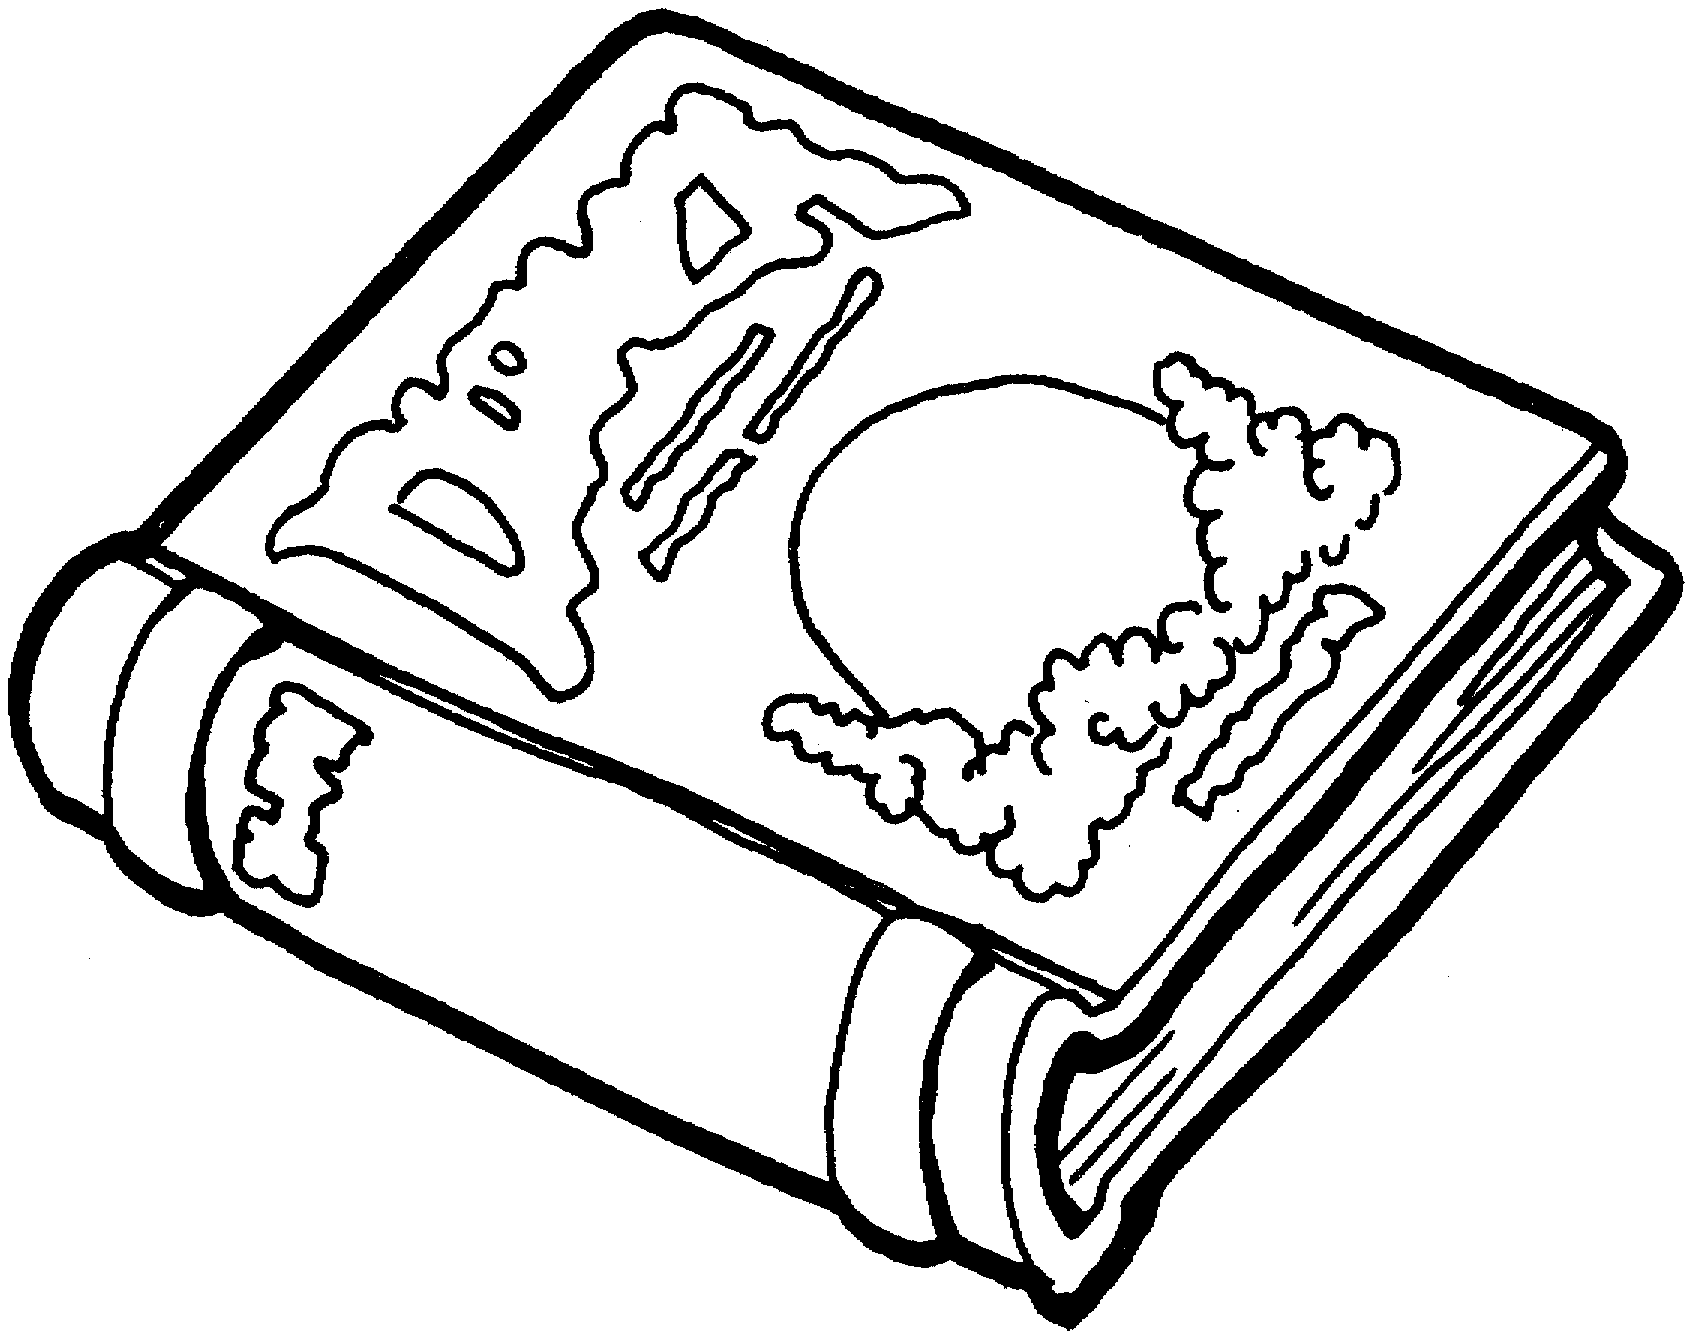 Coloring Pages Of Books   Slehvisualdnsnet   Coloring Home